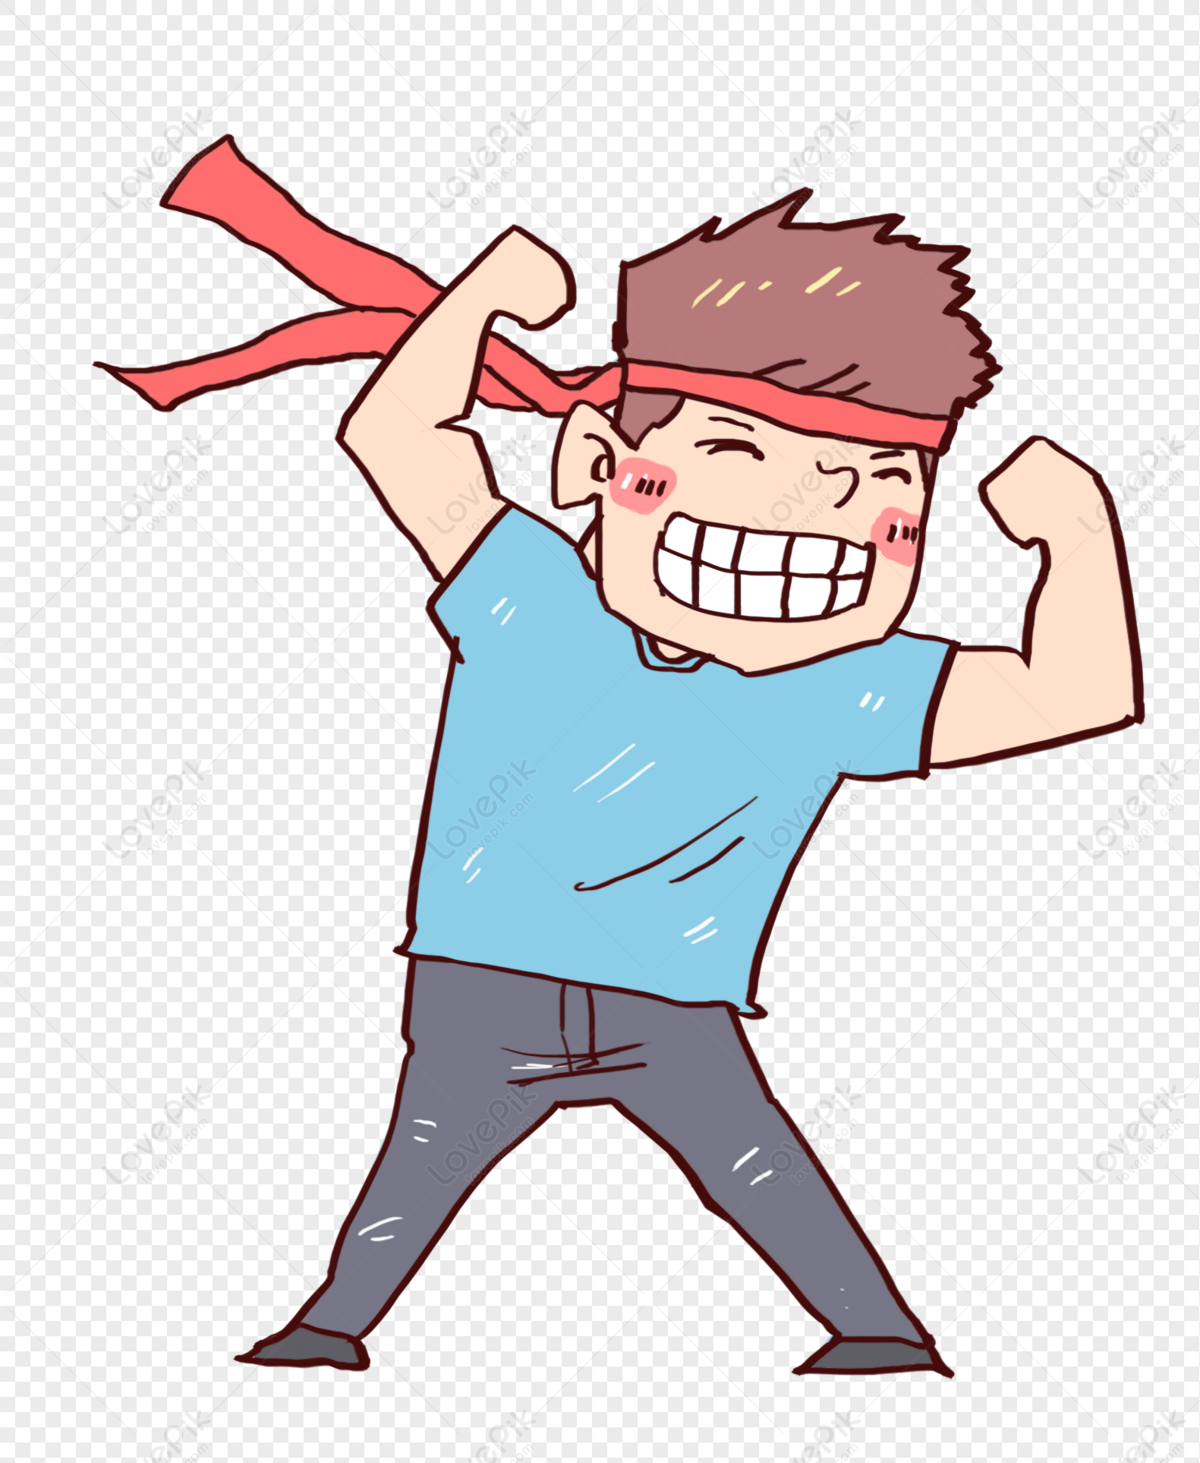 Confident Boy PNG Image Free Download And Clipart Image For Free Download -  Lovepik | 400244281